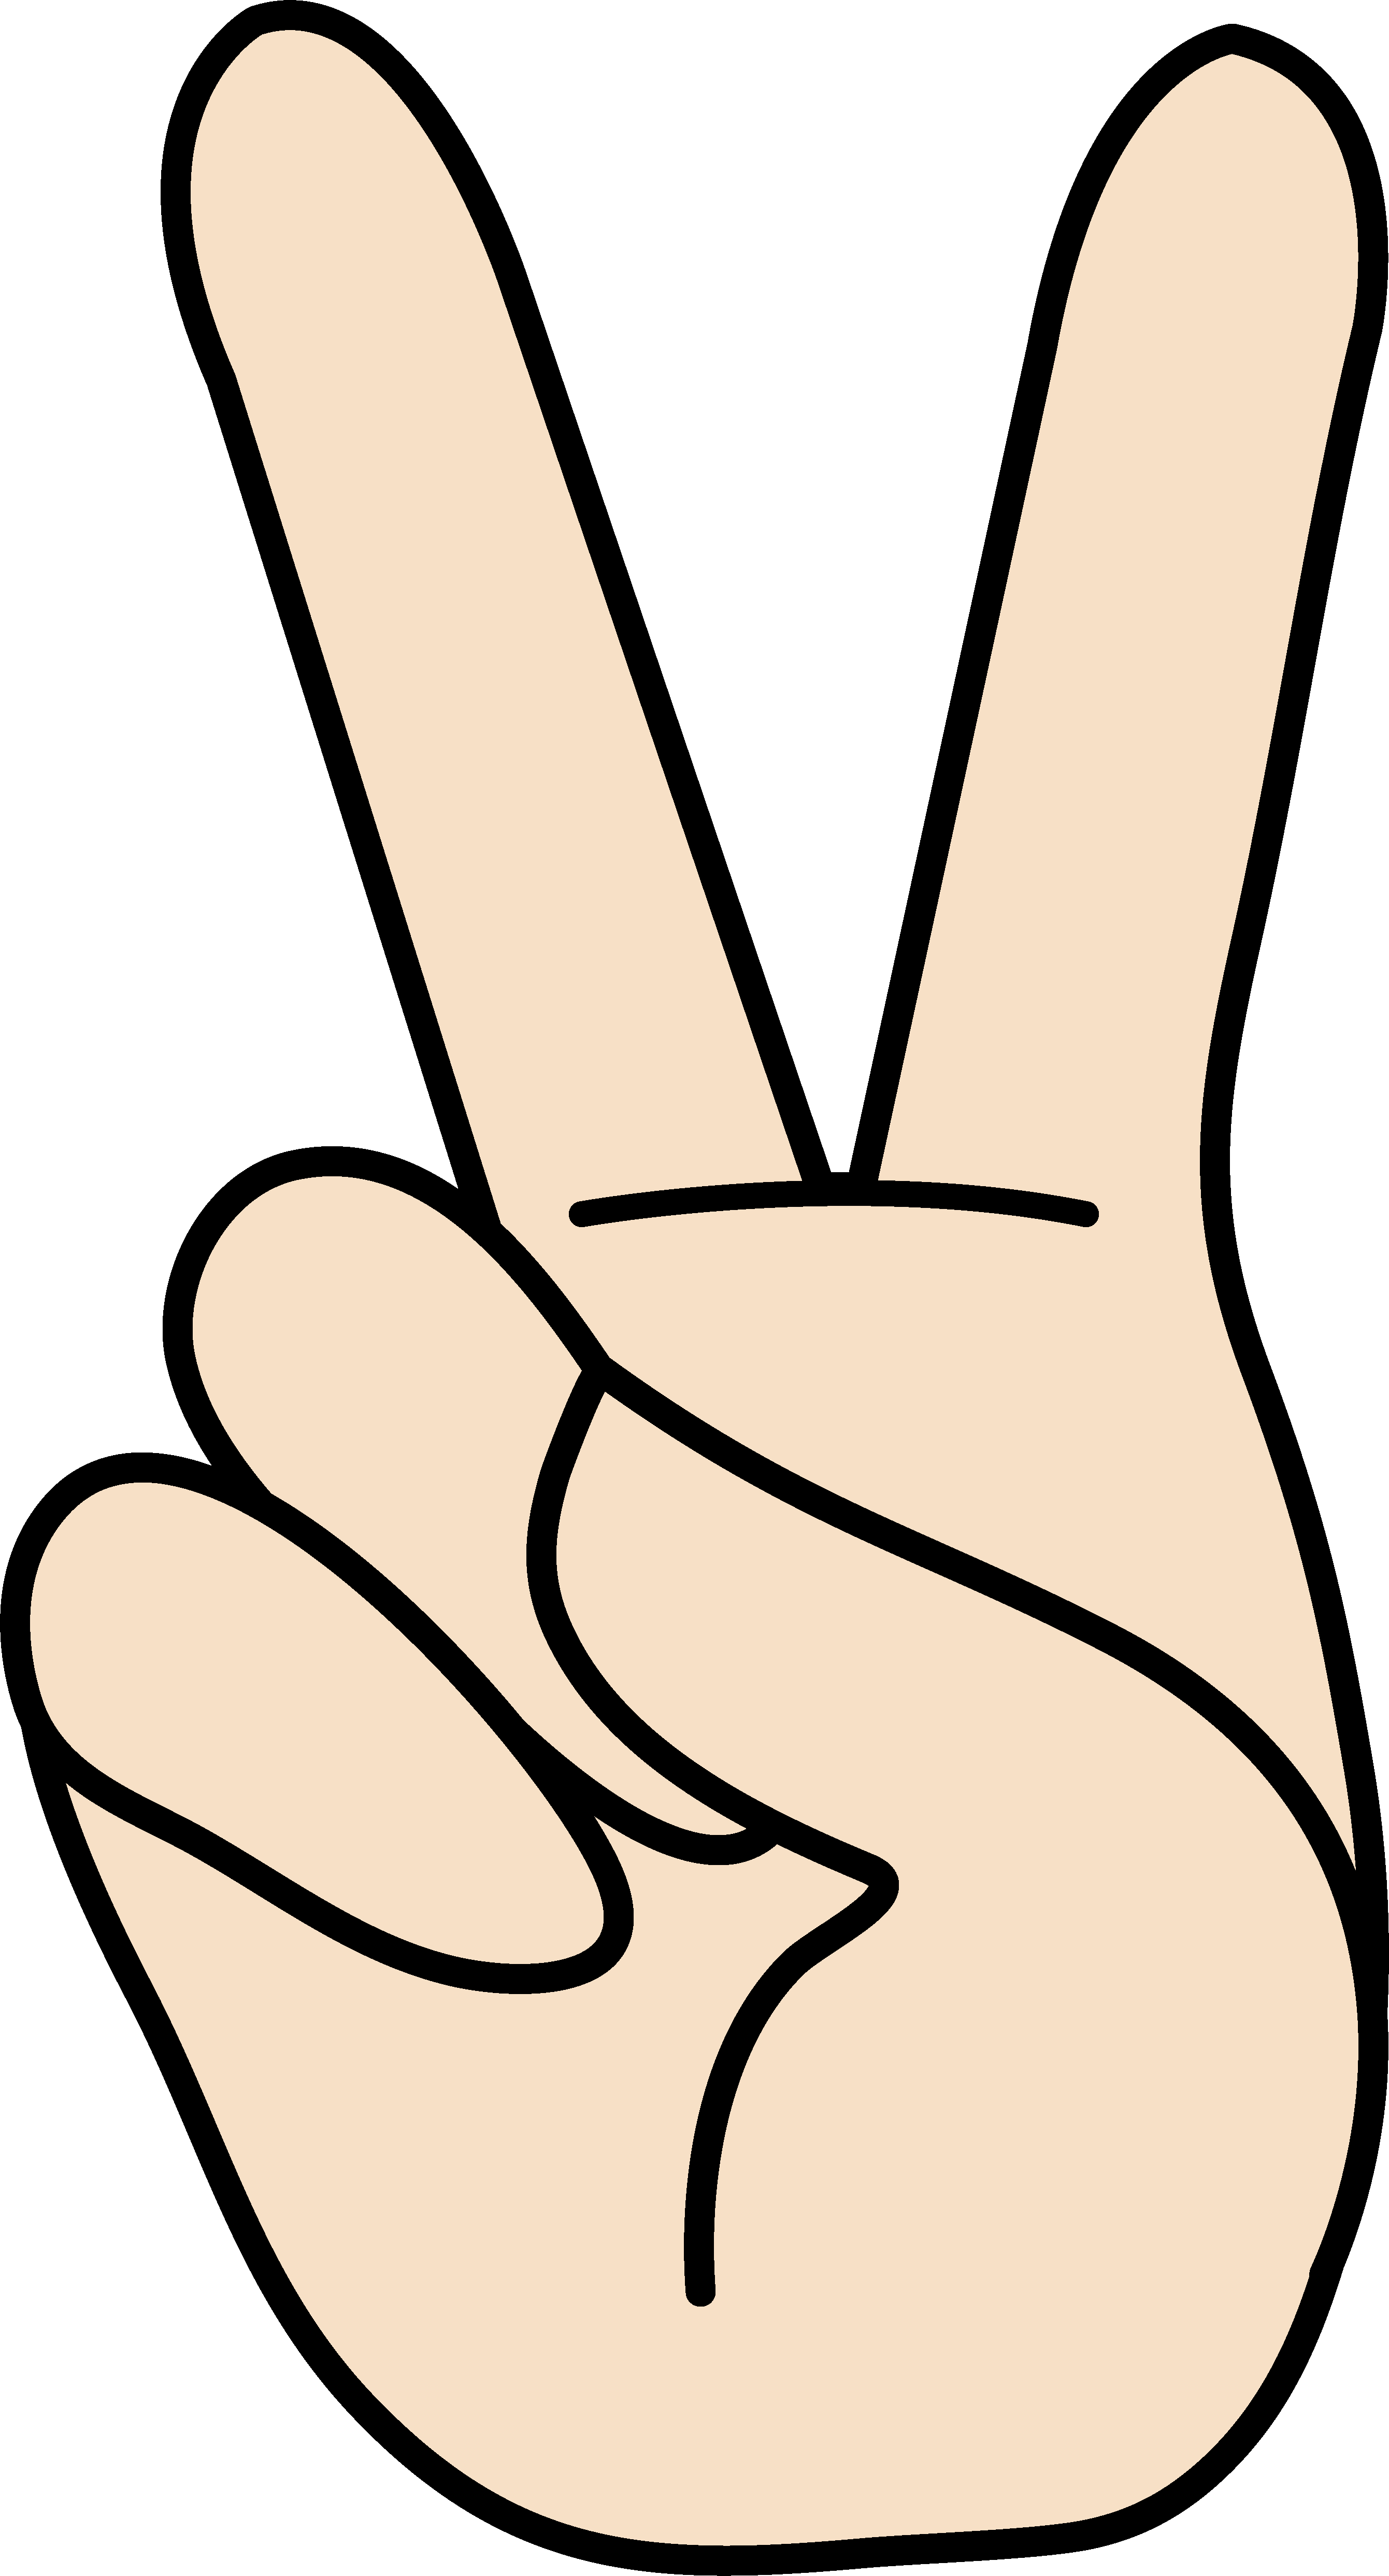 Peace sign free clip. Hand clipart signing